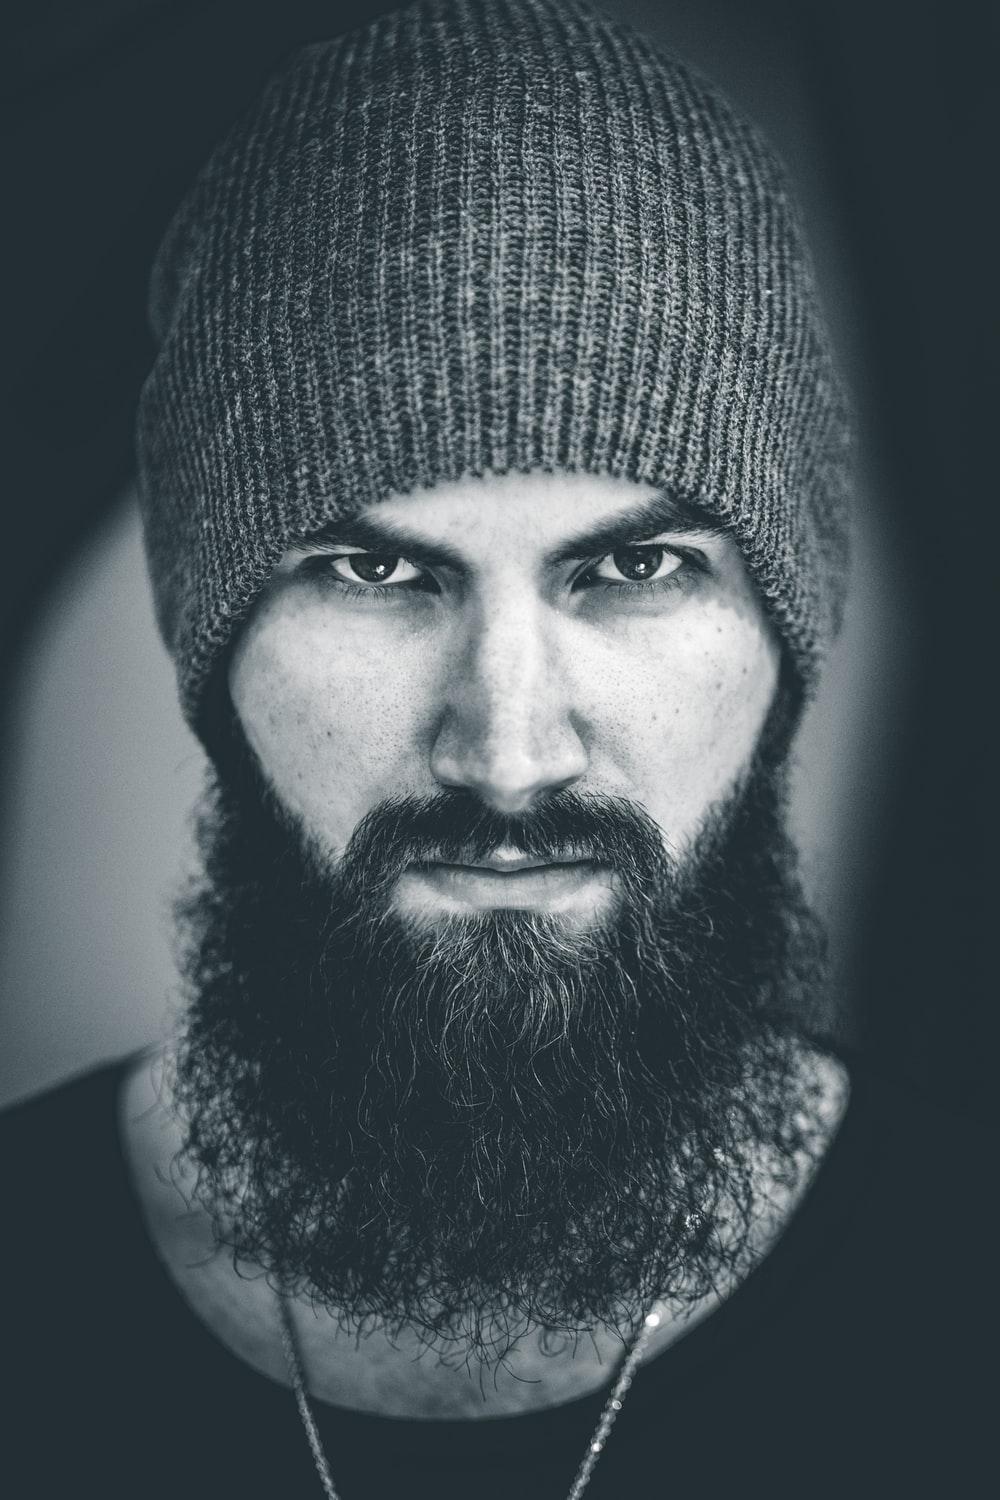 Beard Picture. Download Free Image